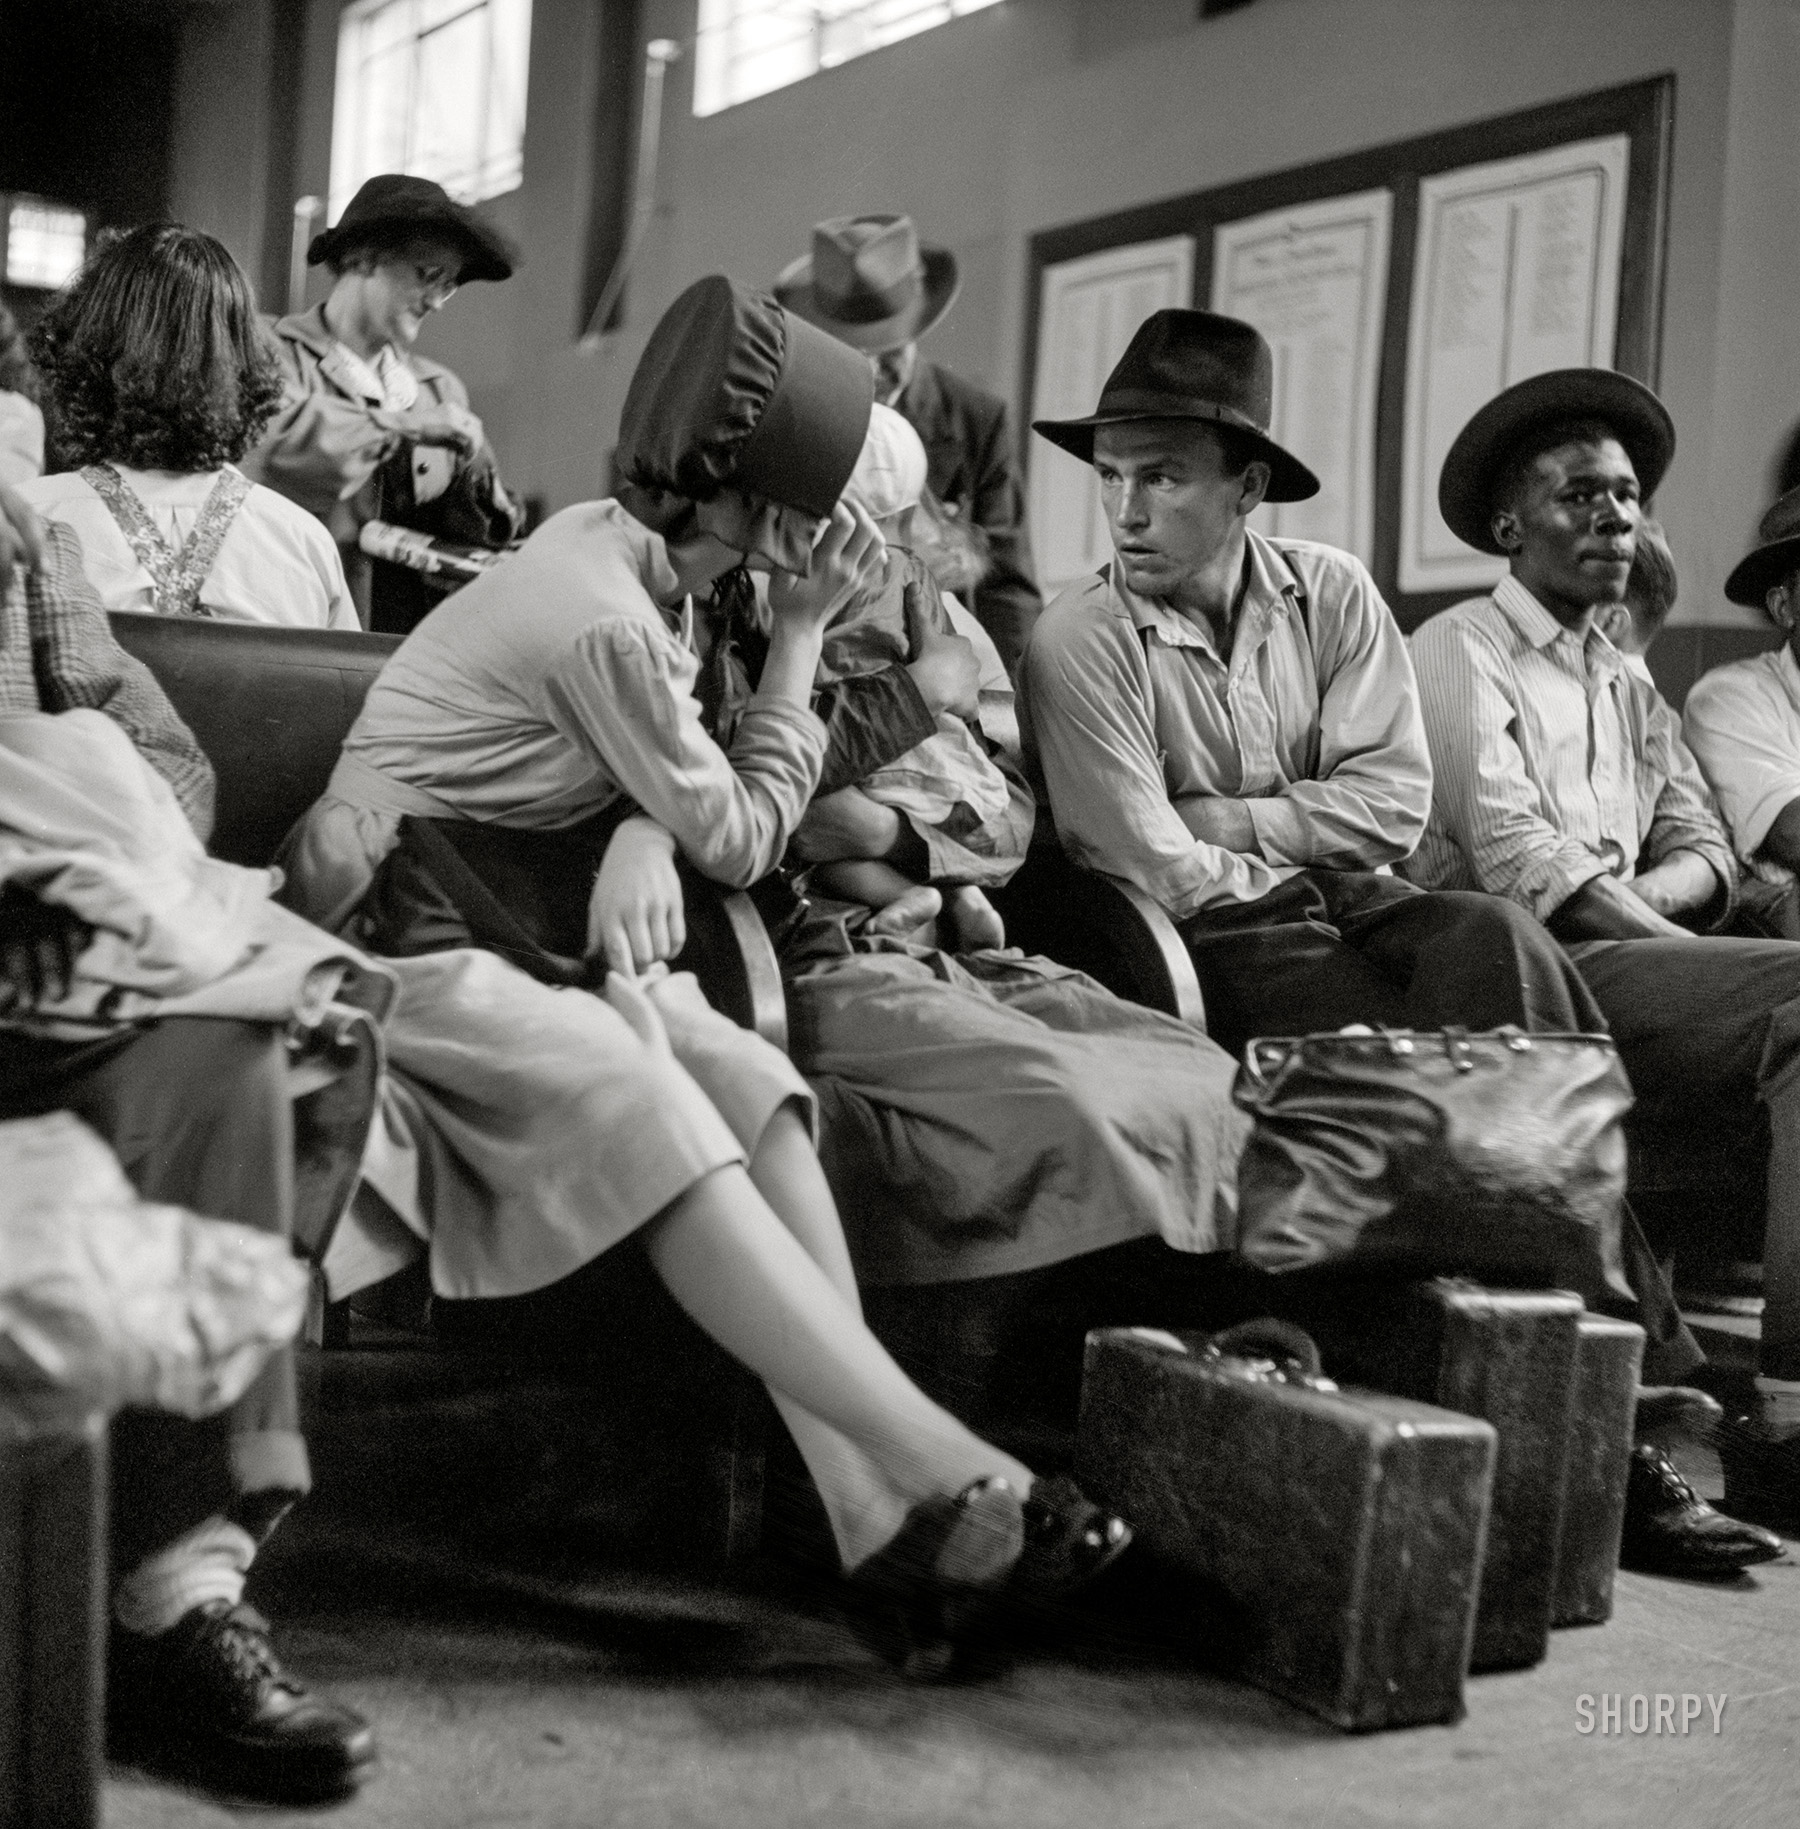 September 1943. "Pittsburgh, Pennsylvania. Passengers in the waiting room of the Greyhound bus station." Nitrate negative by Esther Bubley for the Office of War Information. View full size.